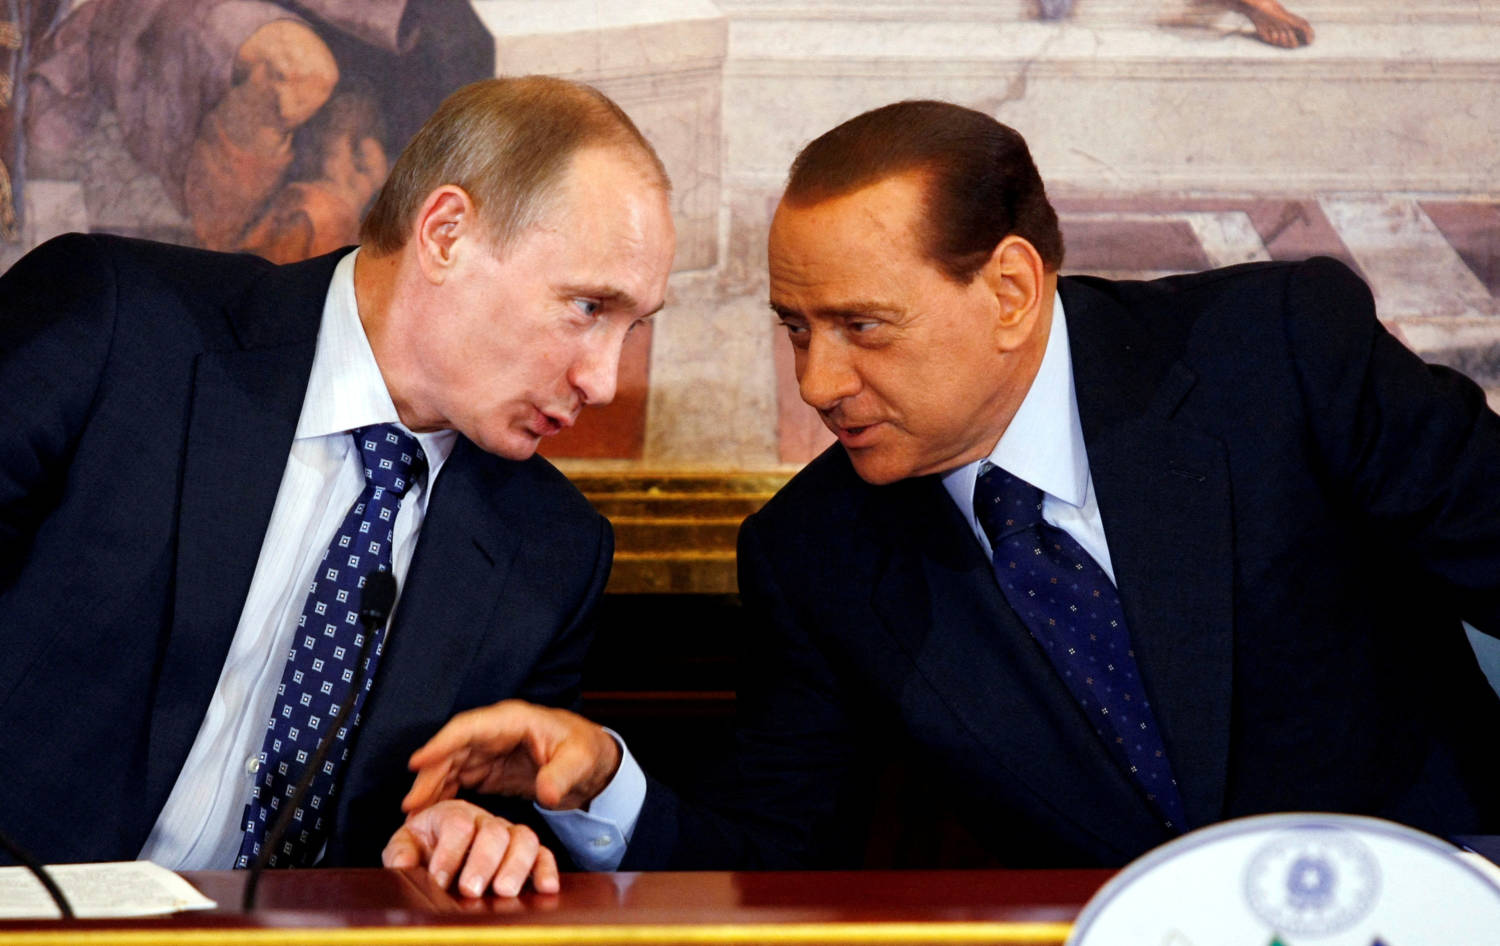 File Photo: Italian Pm Berlusconi Talks With Russian Pm Putin During A News Conference During A Summit At Villa Gernetto In Gerno